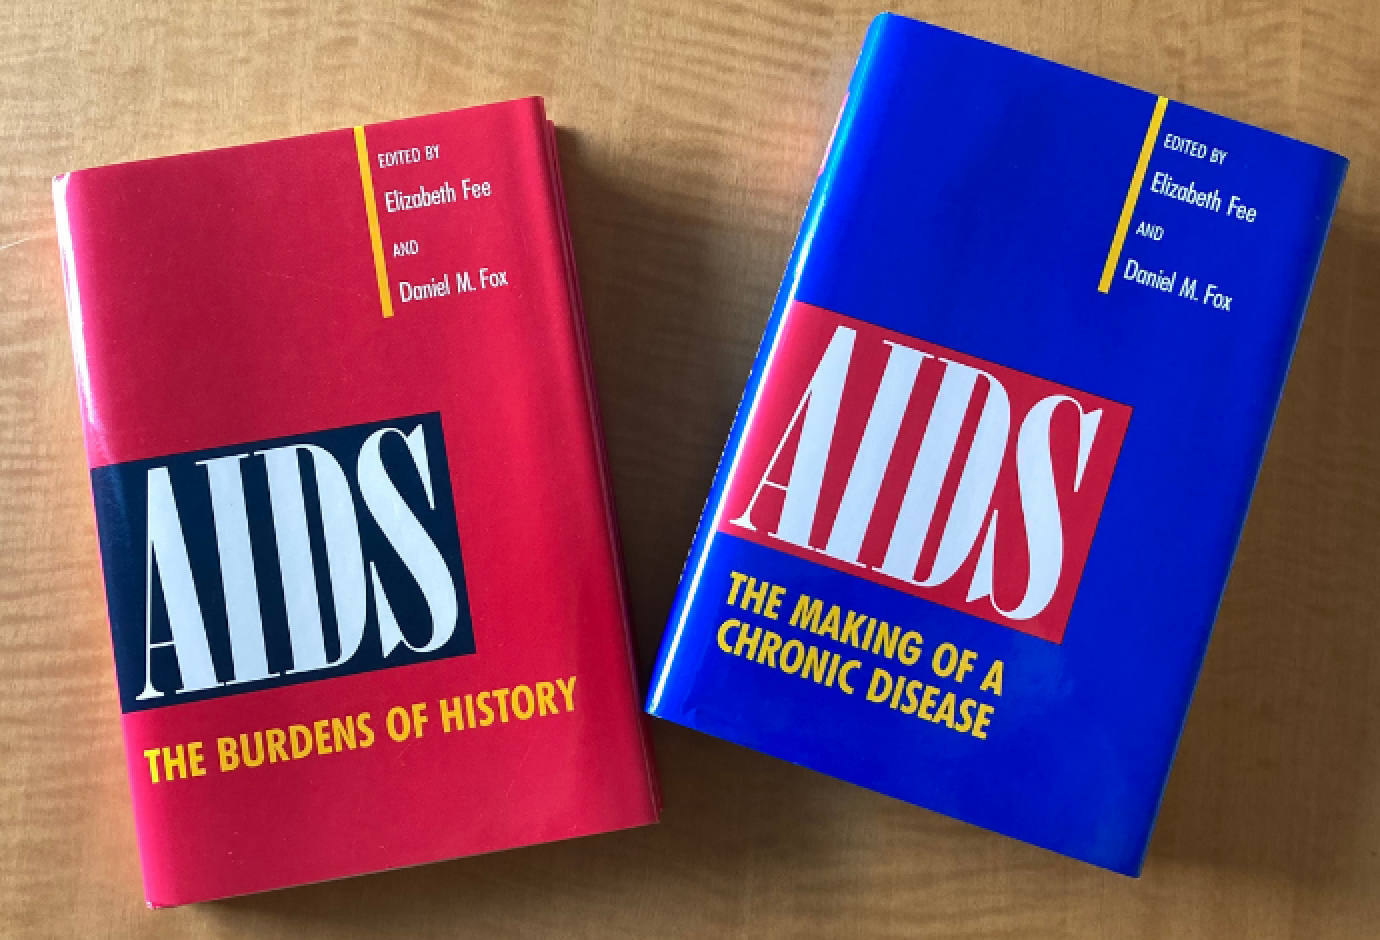 Two hardcover books on a table, “AIDS: The Burden of History” and “AIDS: The Making of a Chronic Disease.”